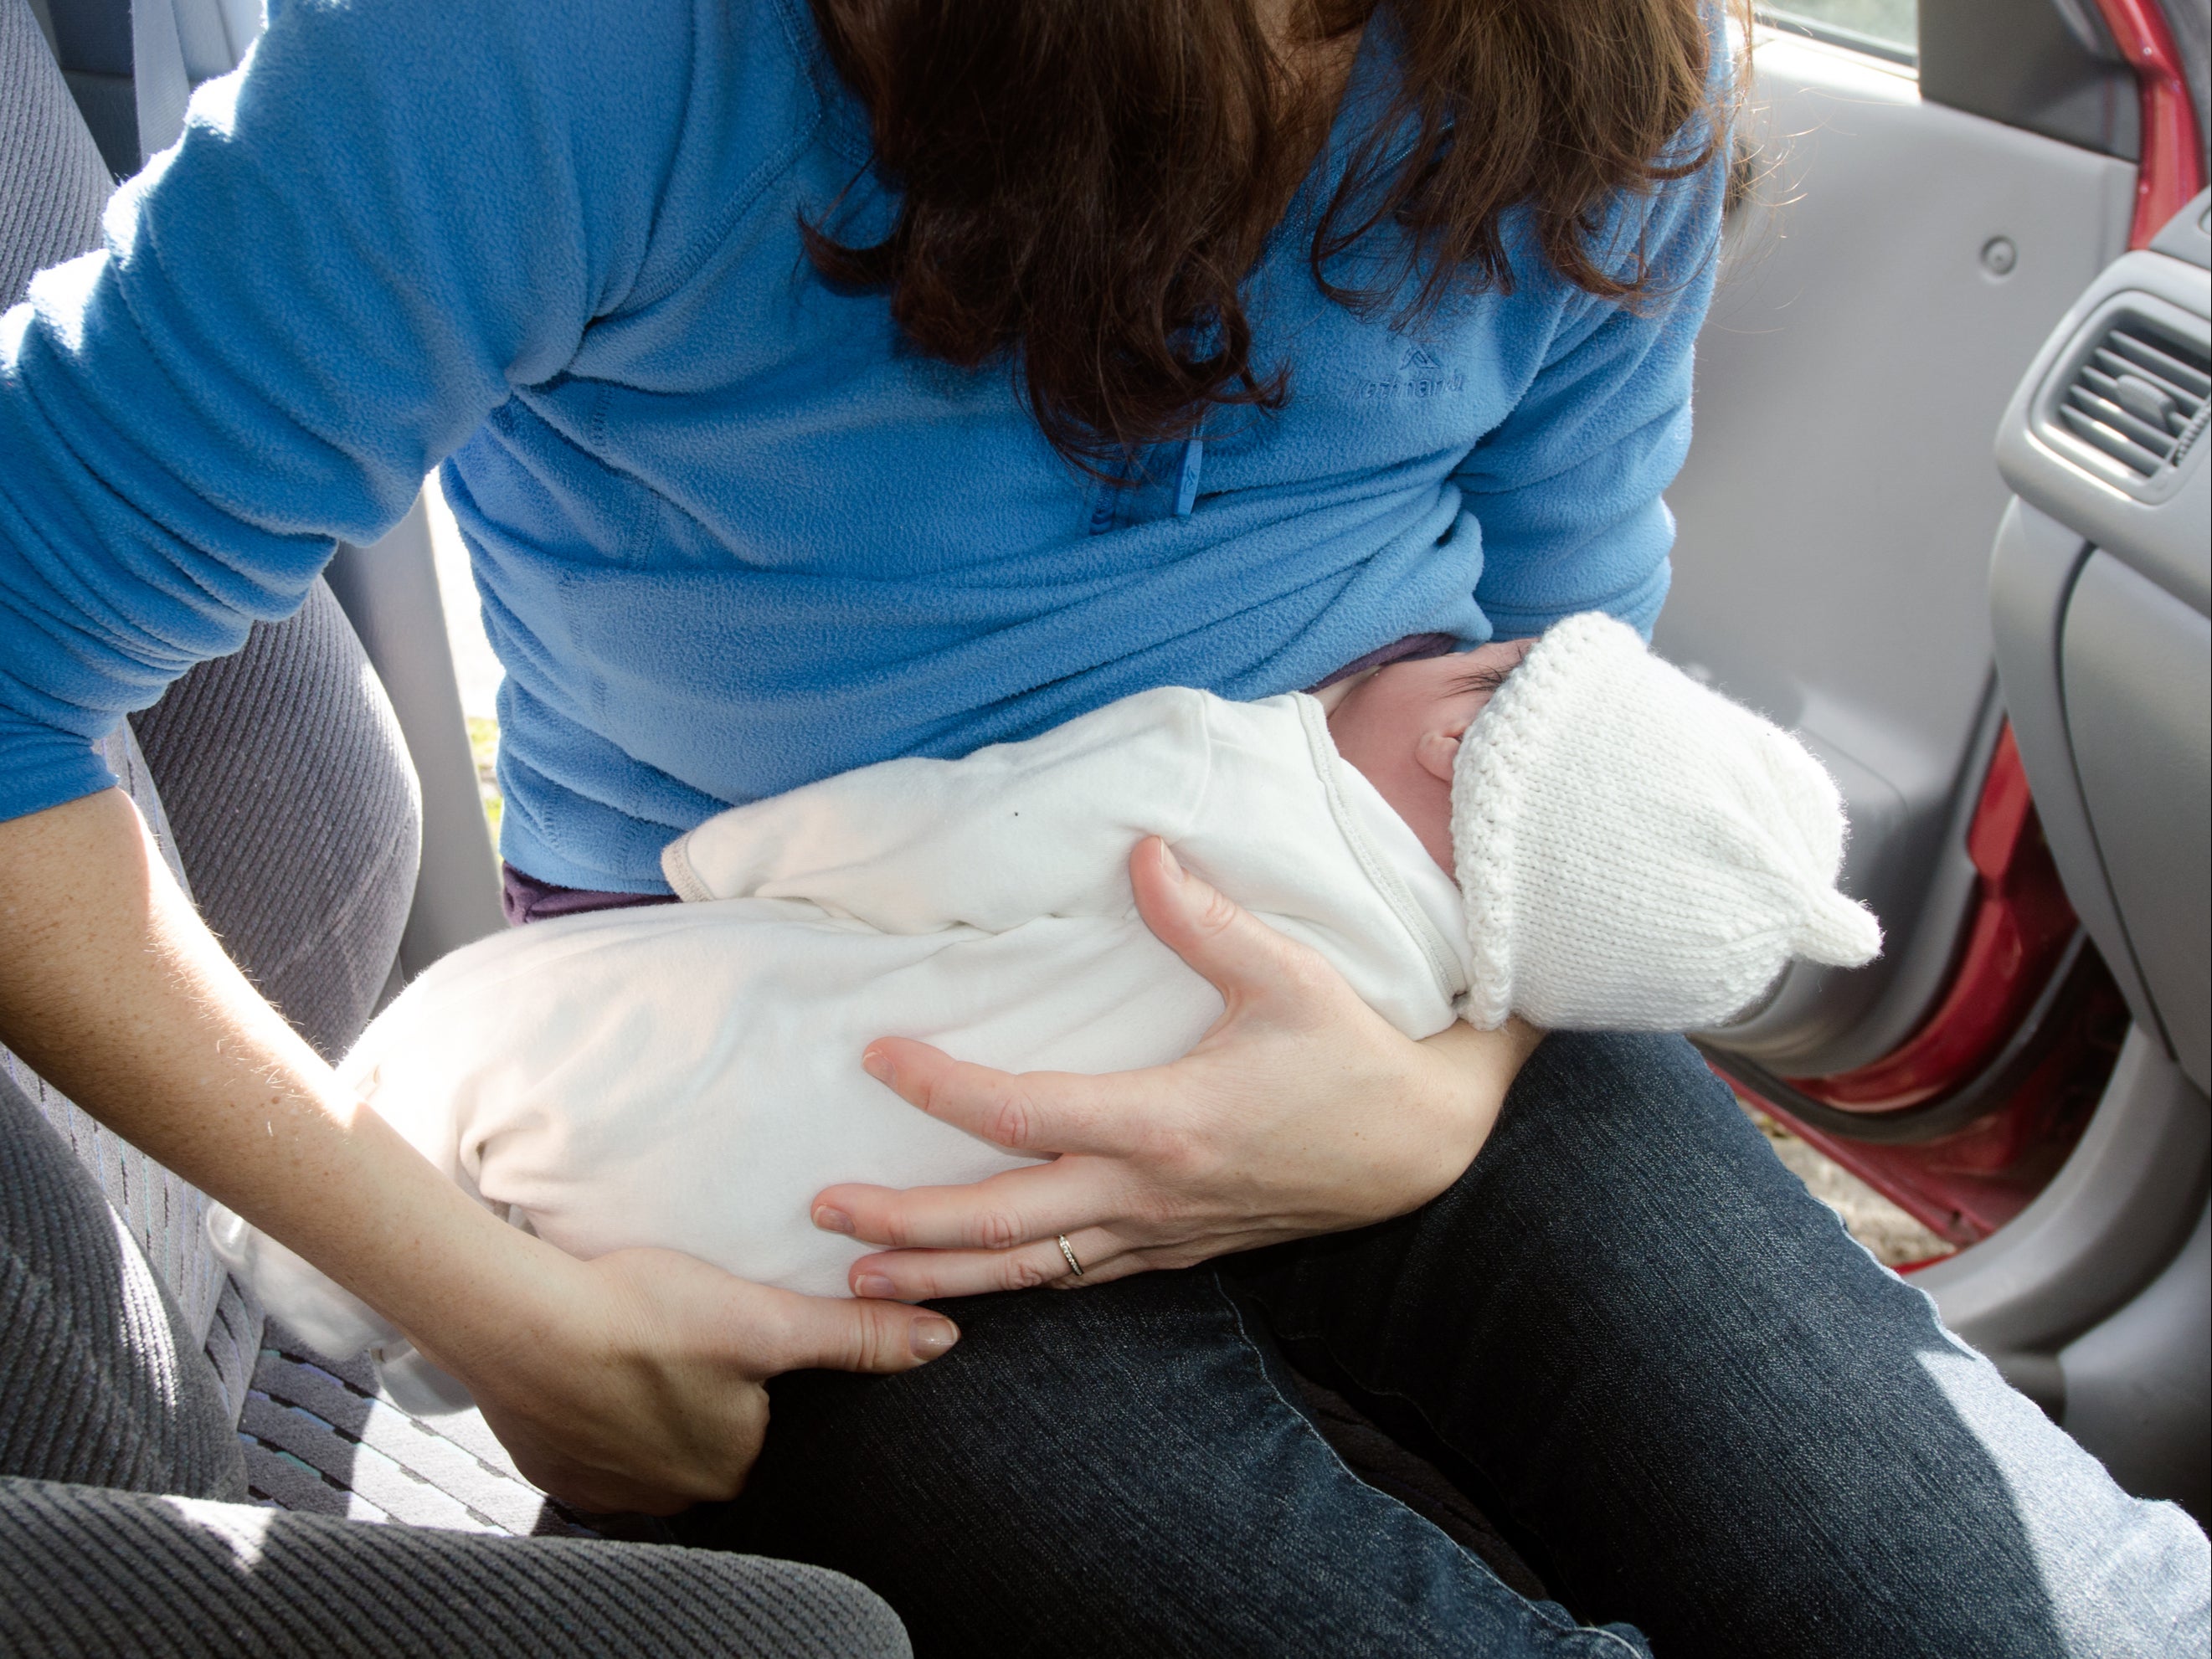 The woman was breastfeeding her baby in her car